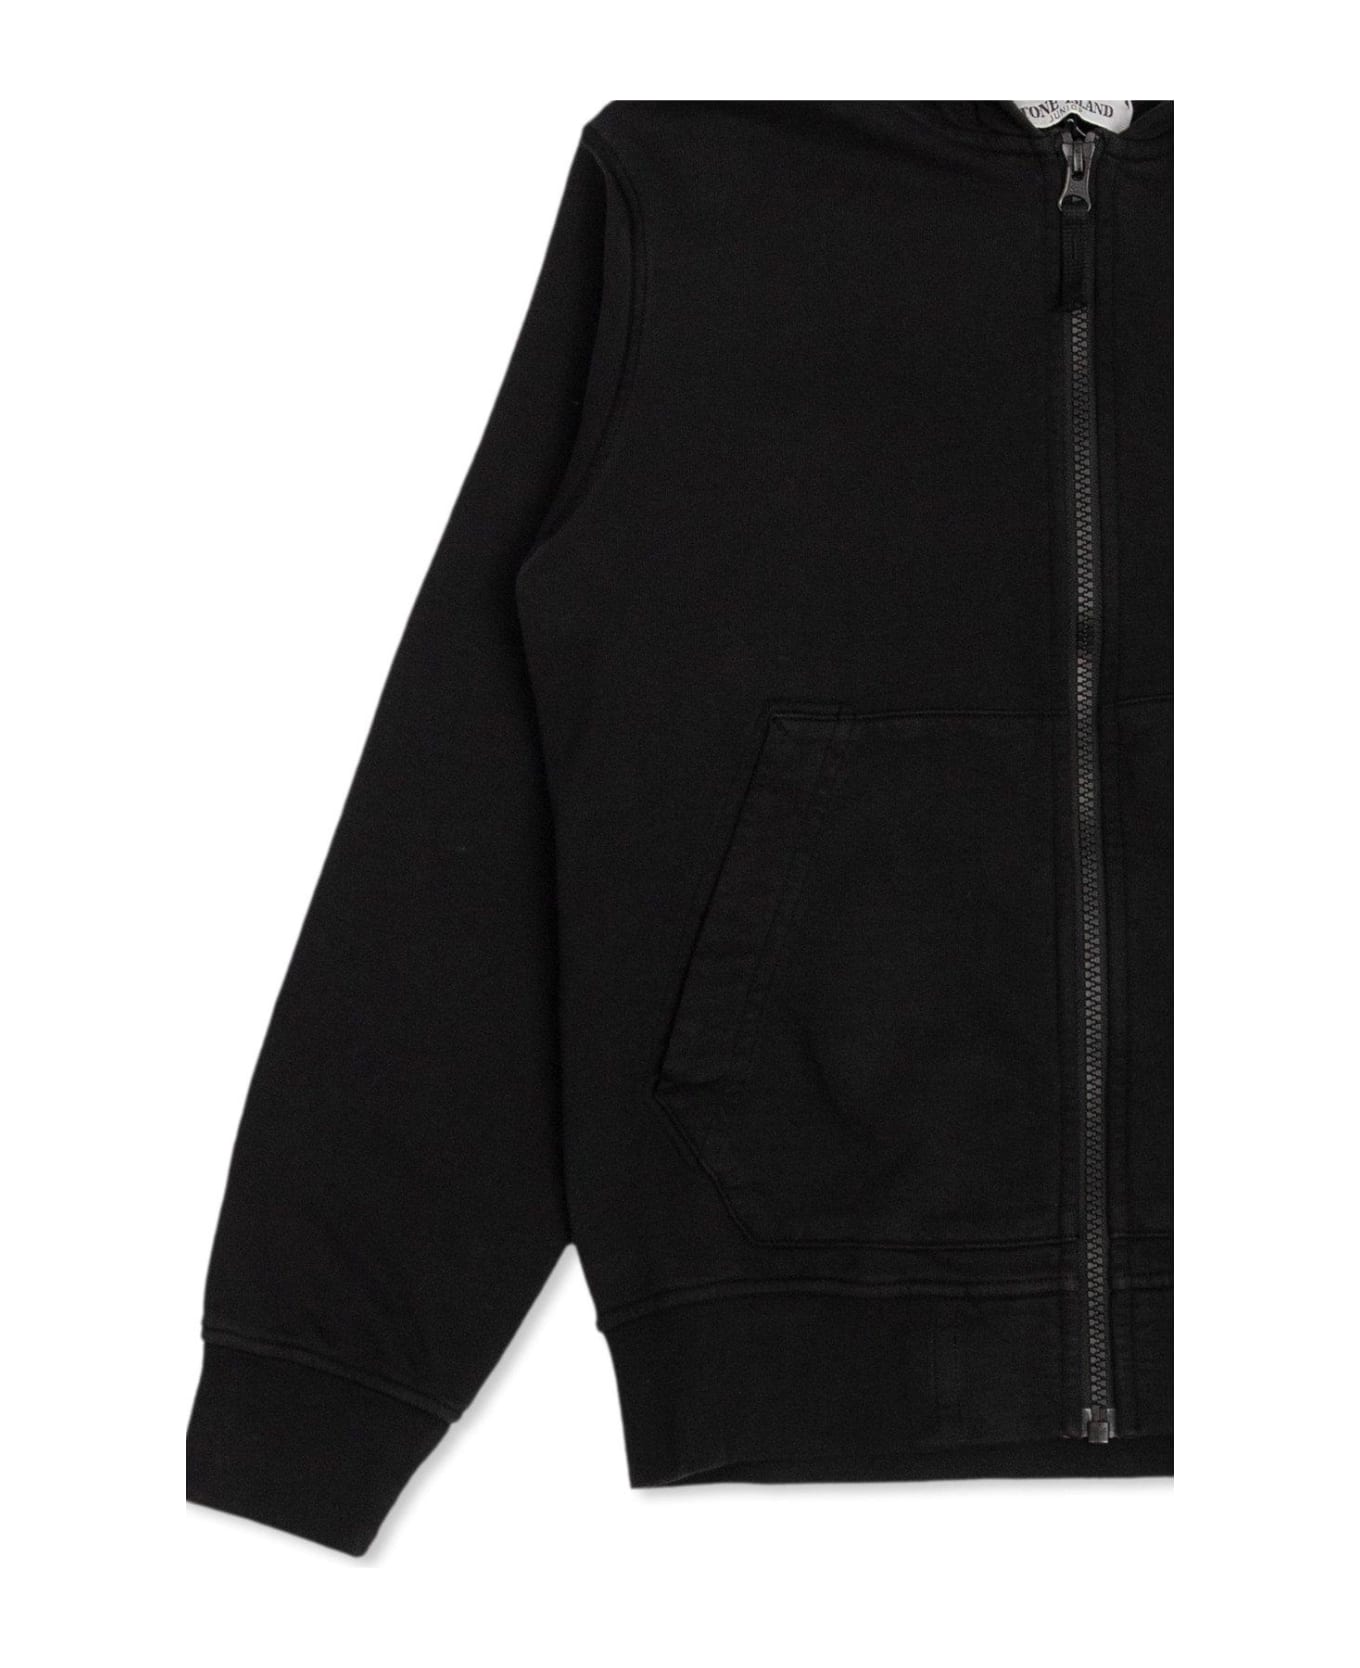 Stone Island Compass-patch Zip-up Hooded Jacket - BLACK コート＆ジャケット